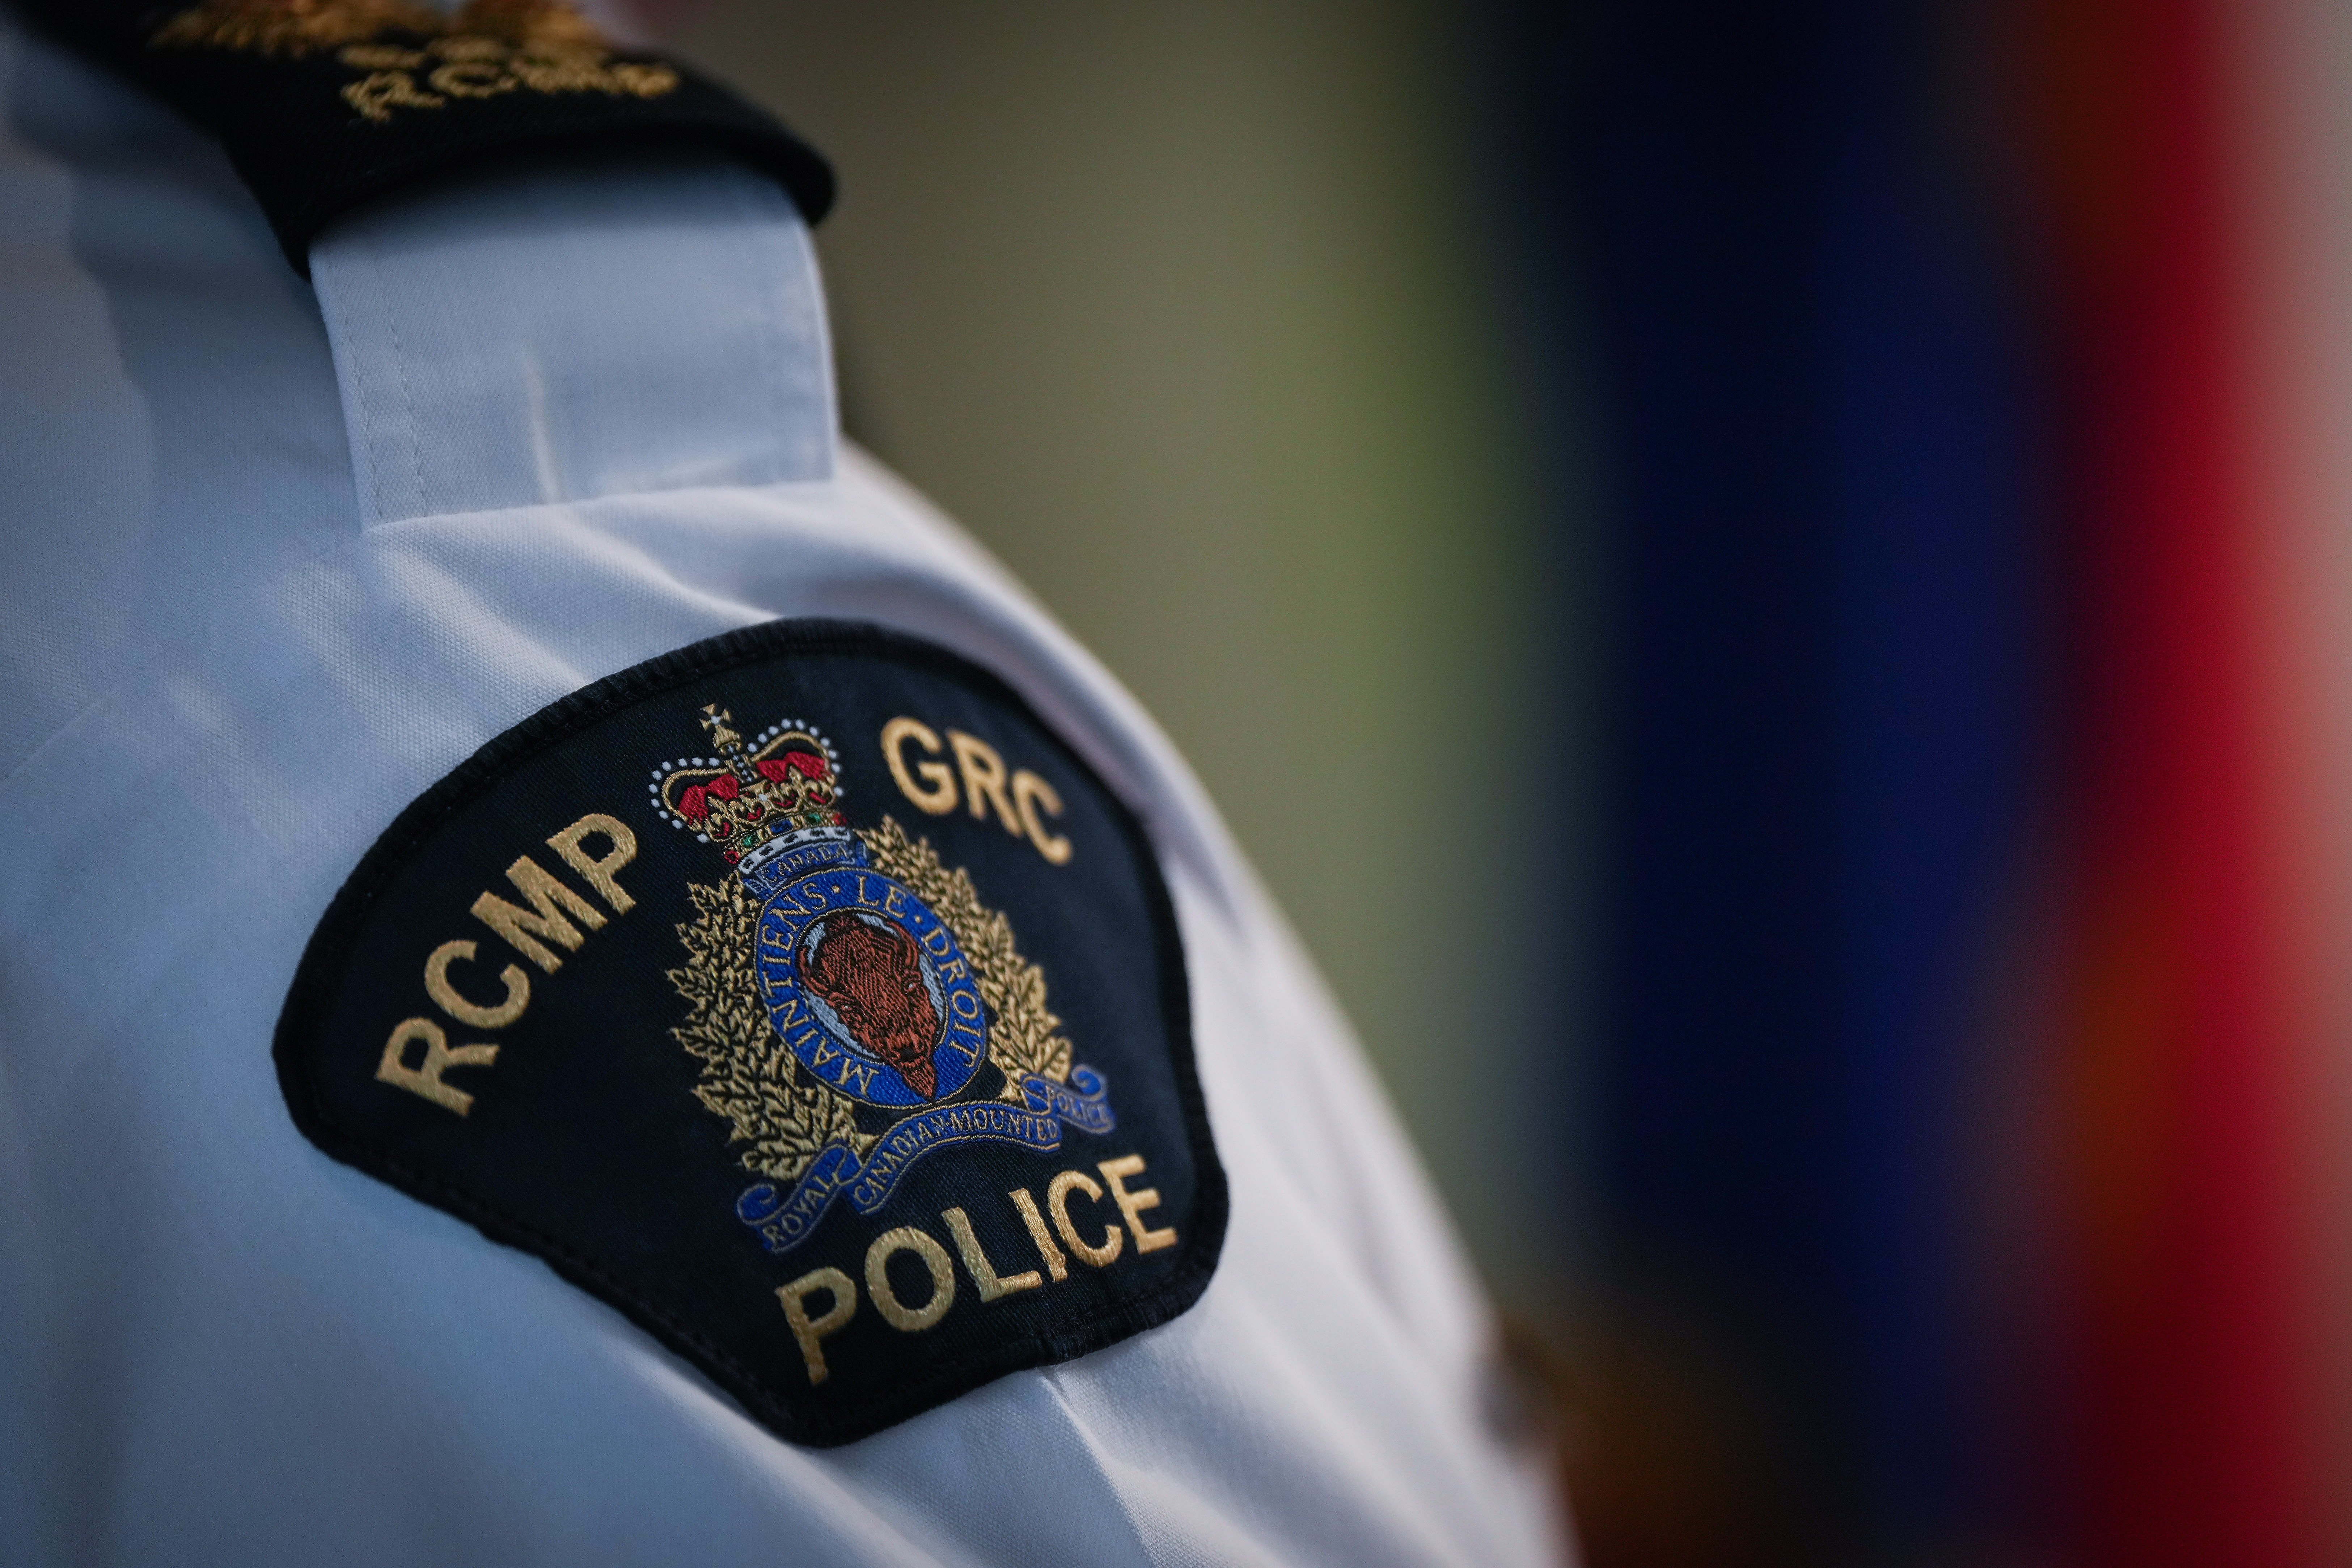 Efforts to combat discrmination in RCMP, public service falling short: auditor general